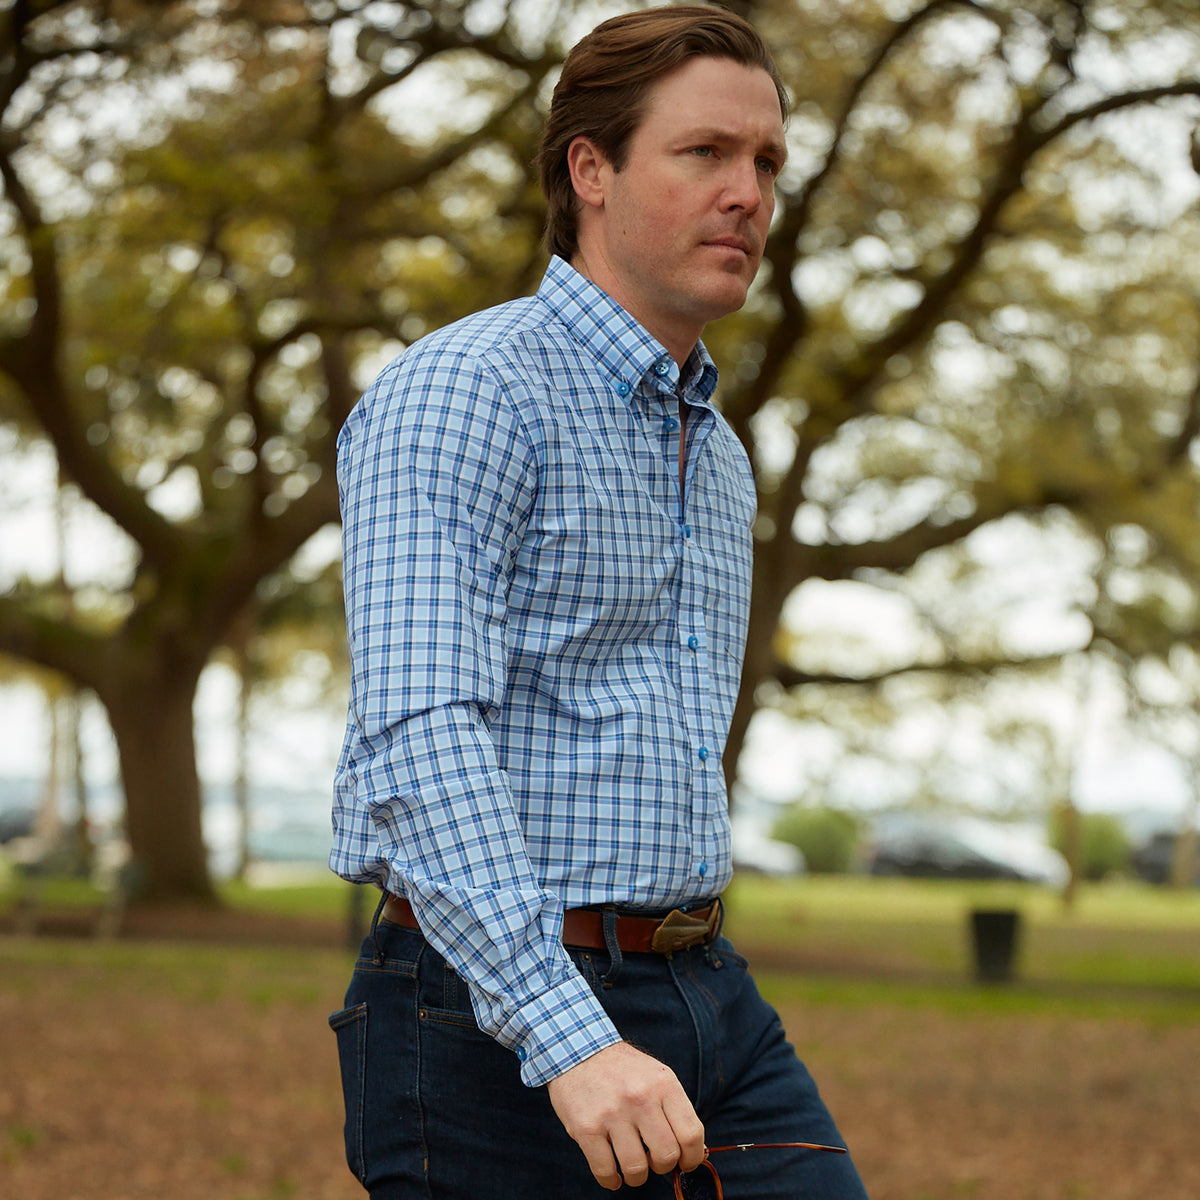 Enjoy the luxury of 100% cotton, Italian made quality, and bold navy &amp; light blue plaid.  100% Cotton • Button Down Collar • Long Sleeve • Contrast Buttons • Chest Pocket • Machine Washable • Made in Italy